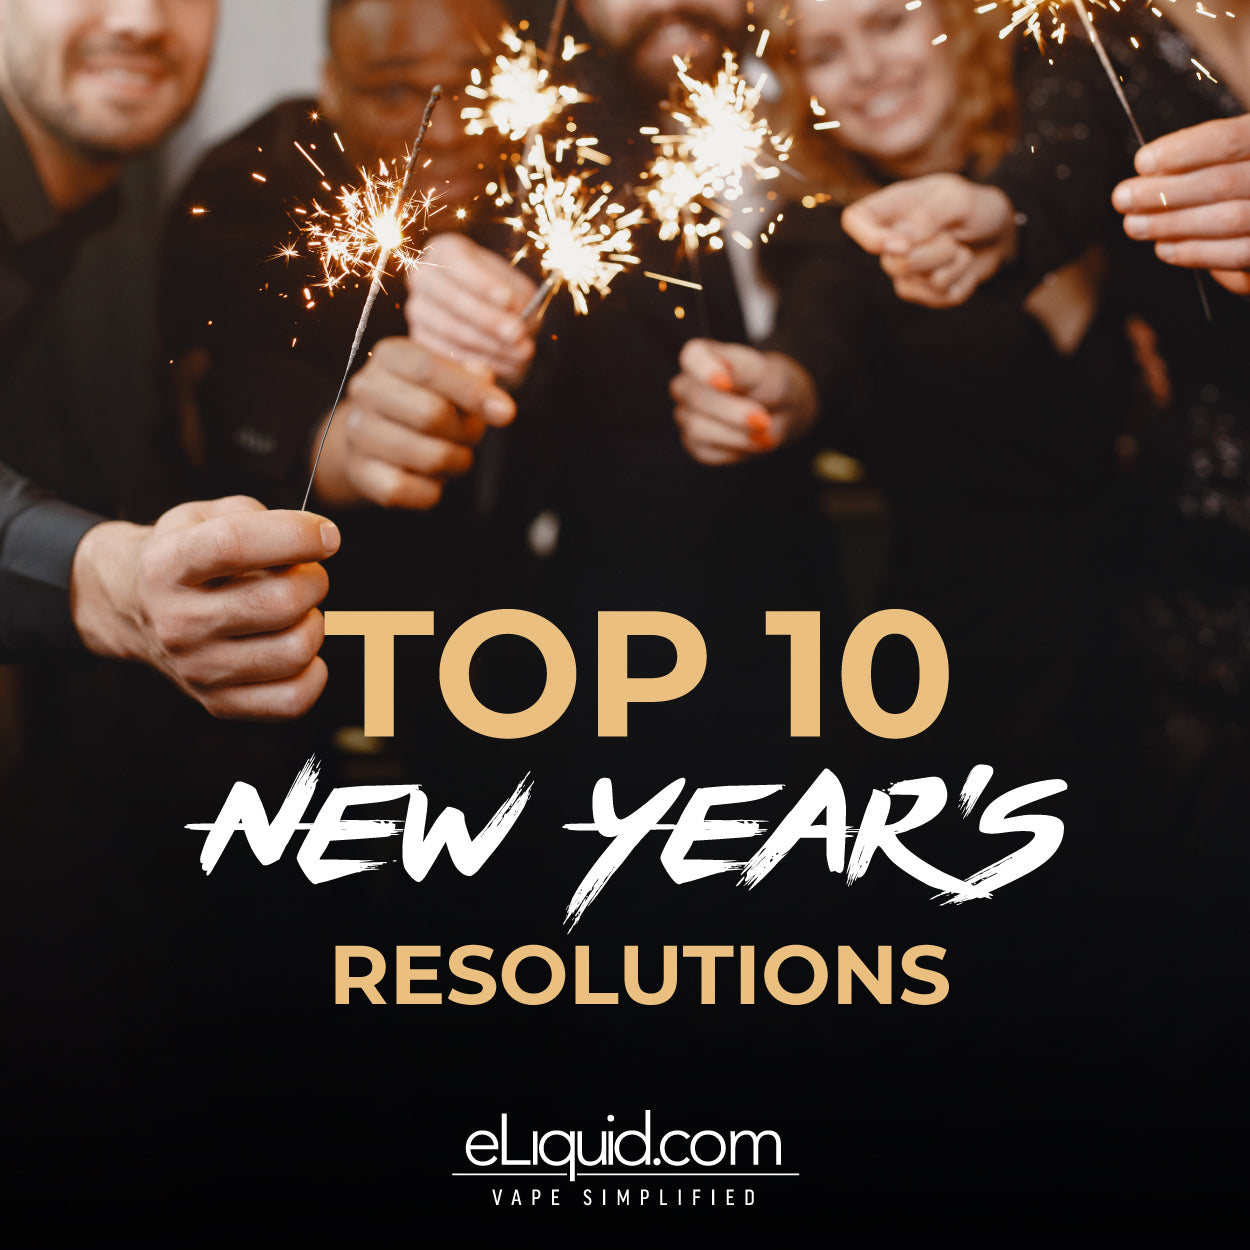 Top Ten New Year’s Resolutions for Vapers